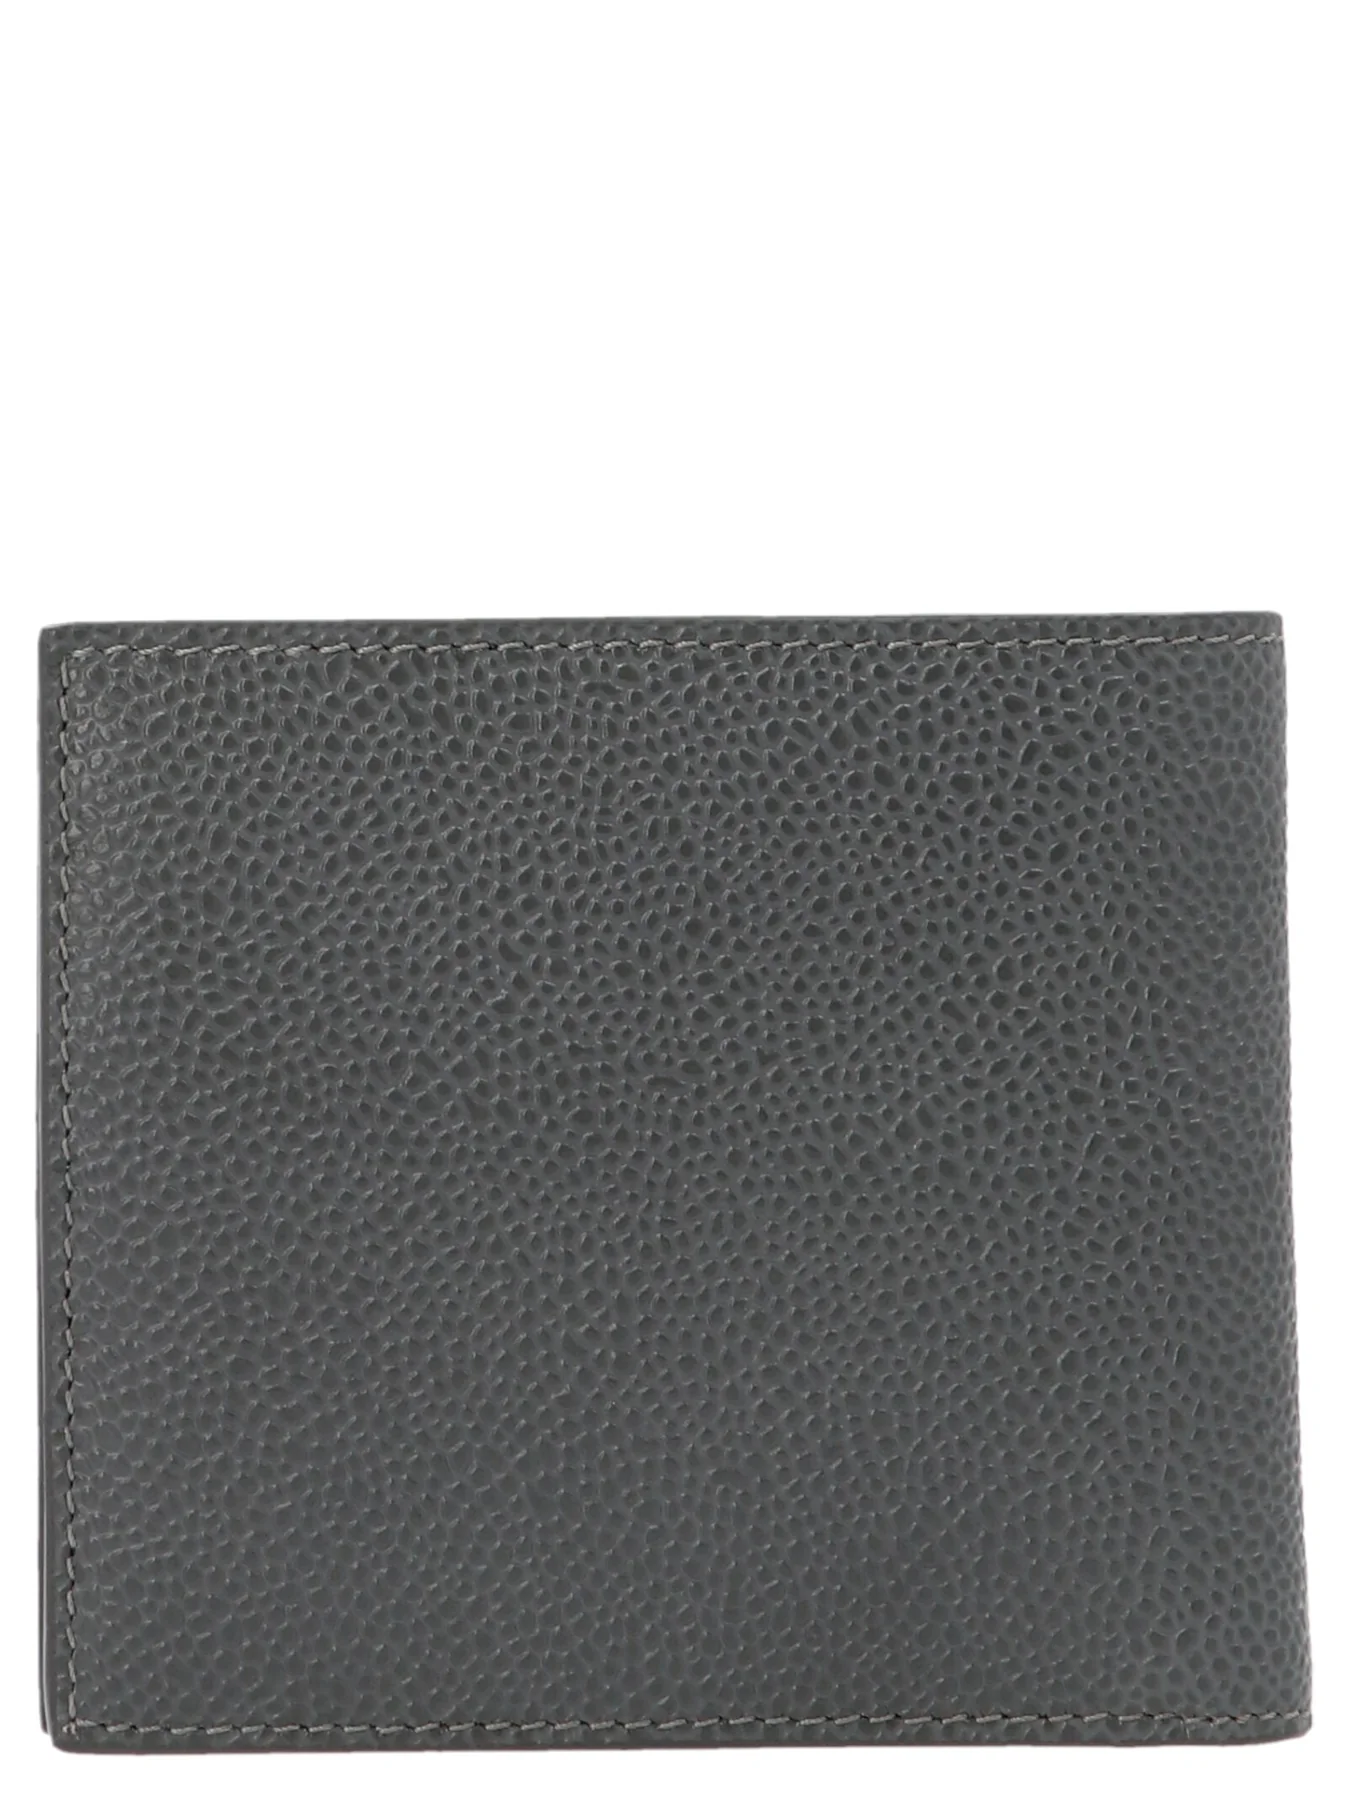 Card Holder With Note Compartment In Black Pebble Grain